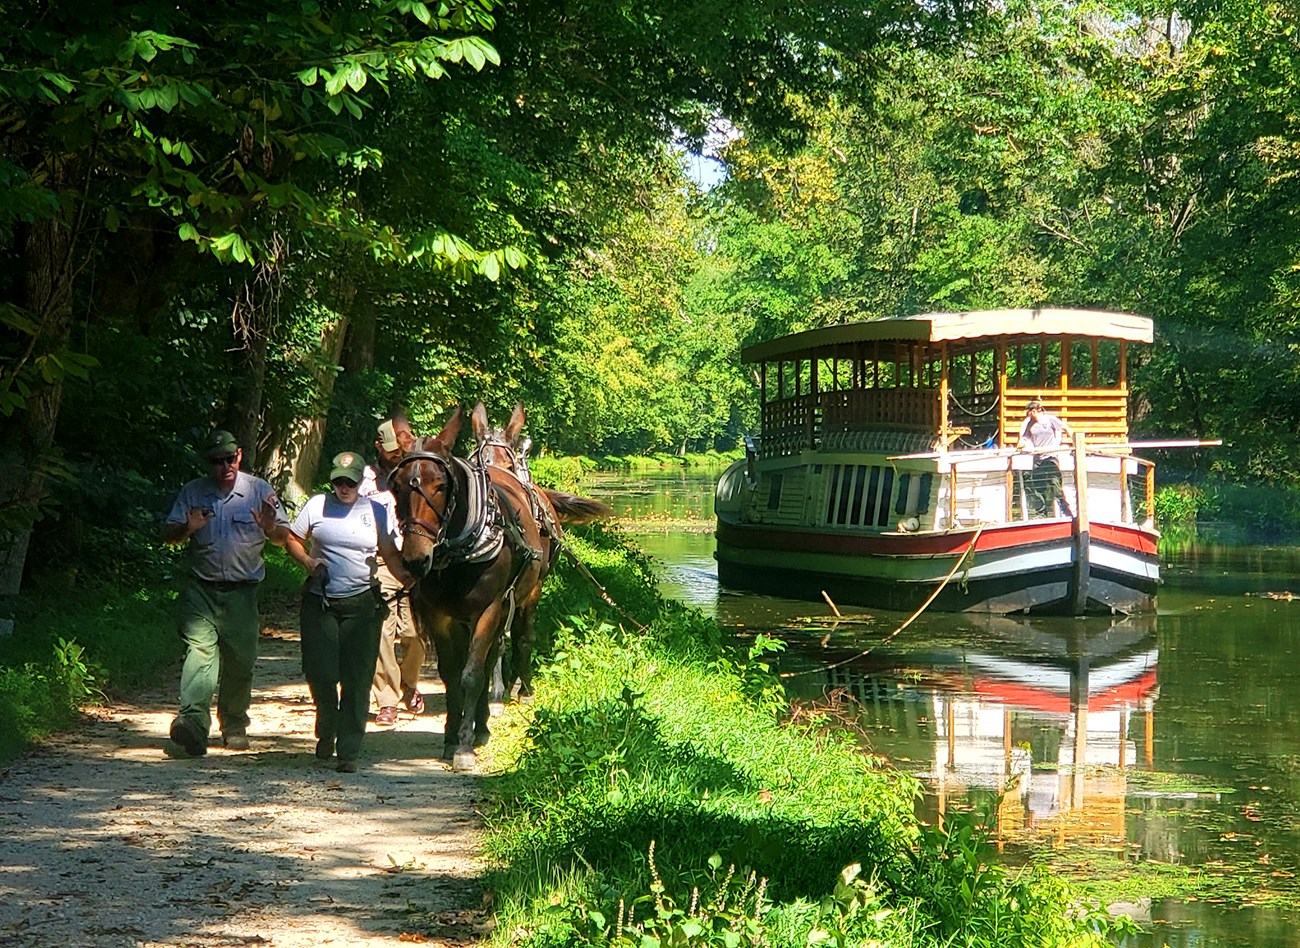 Two men and a woman holding horses walk next to a canal surrounded by lush green plants. There is a ferry with an operator, moored on the canal. The operator and the man and woman in front are wearing NPS uniforms.